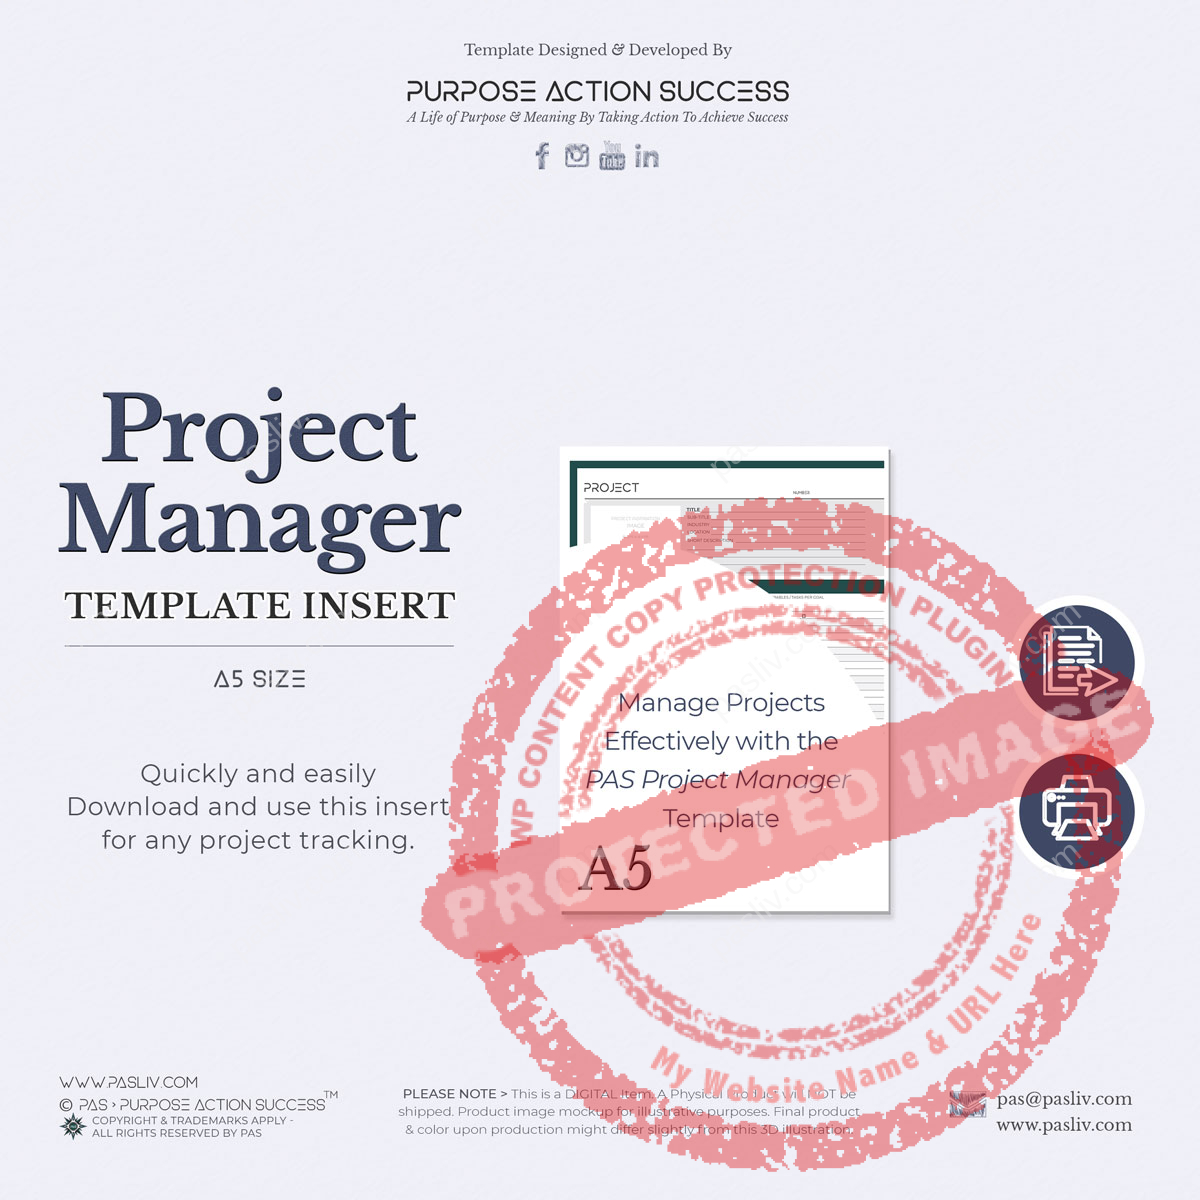 A5 Project Manager Template - Copyright & Trademarks By PAS > Purpose Action Success - All Rights Reserved